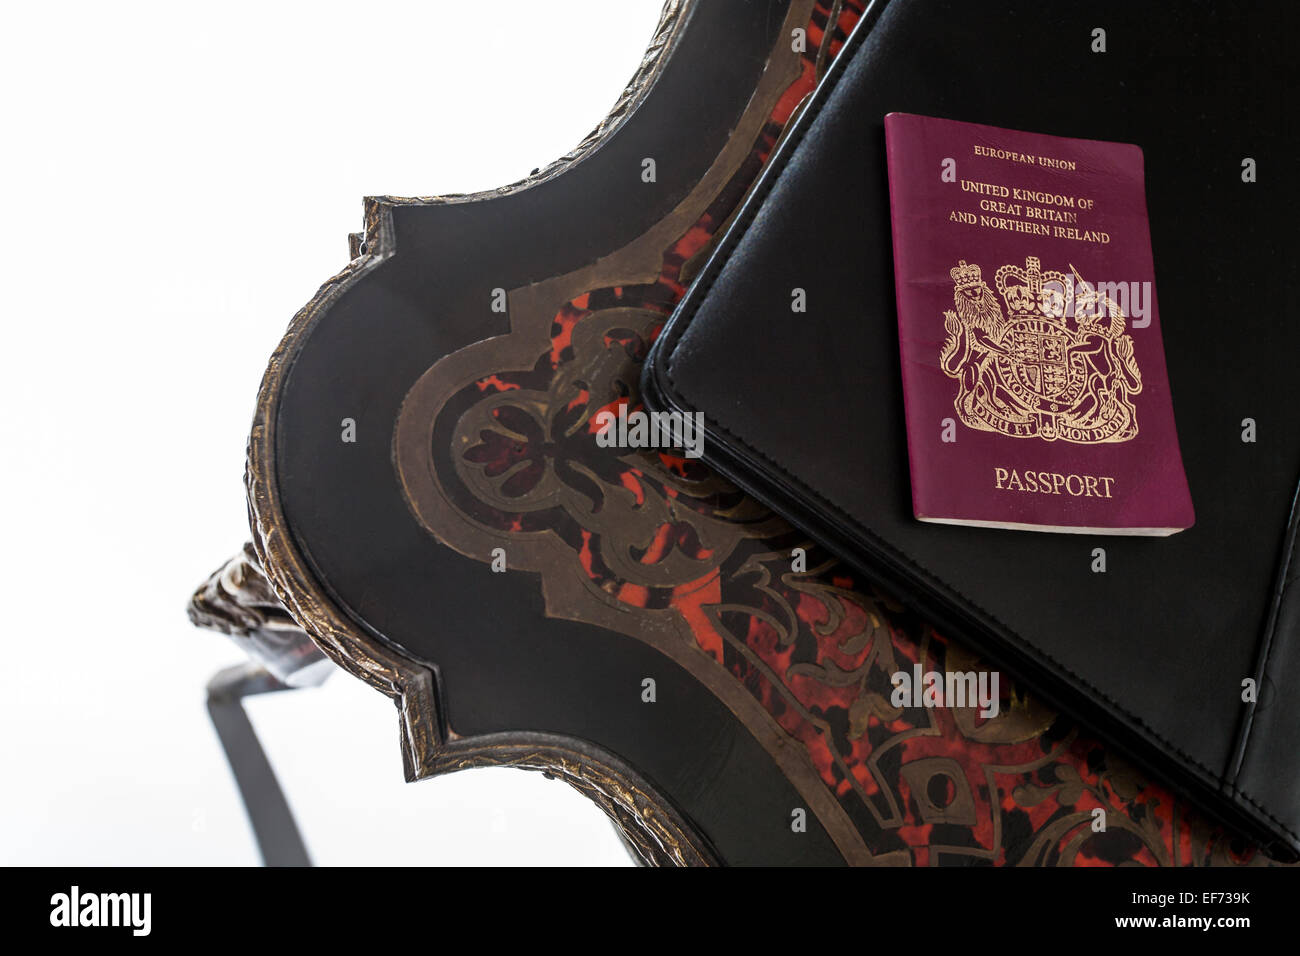 A United Kingdom passport sitting on a Buhl table. Stock Photo